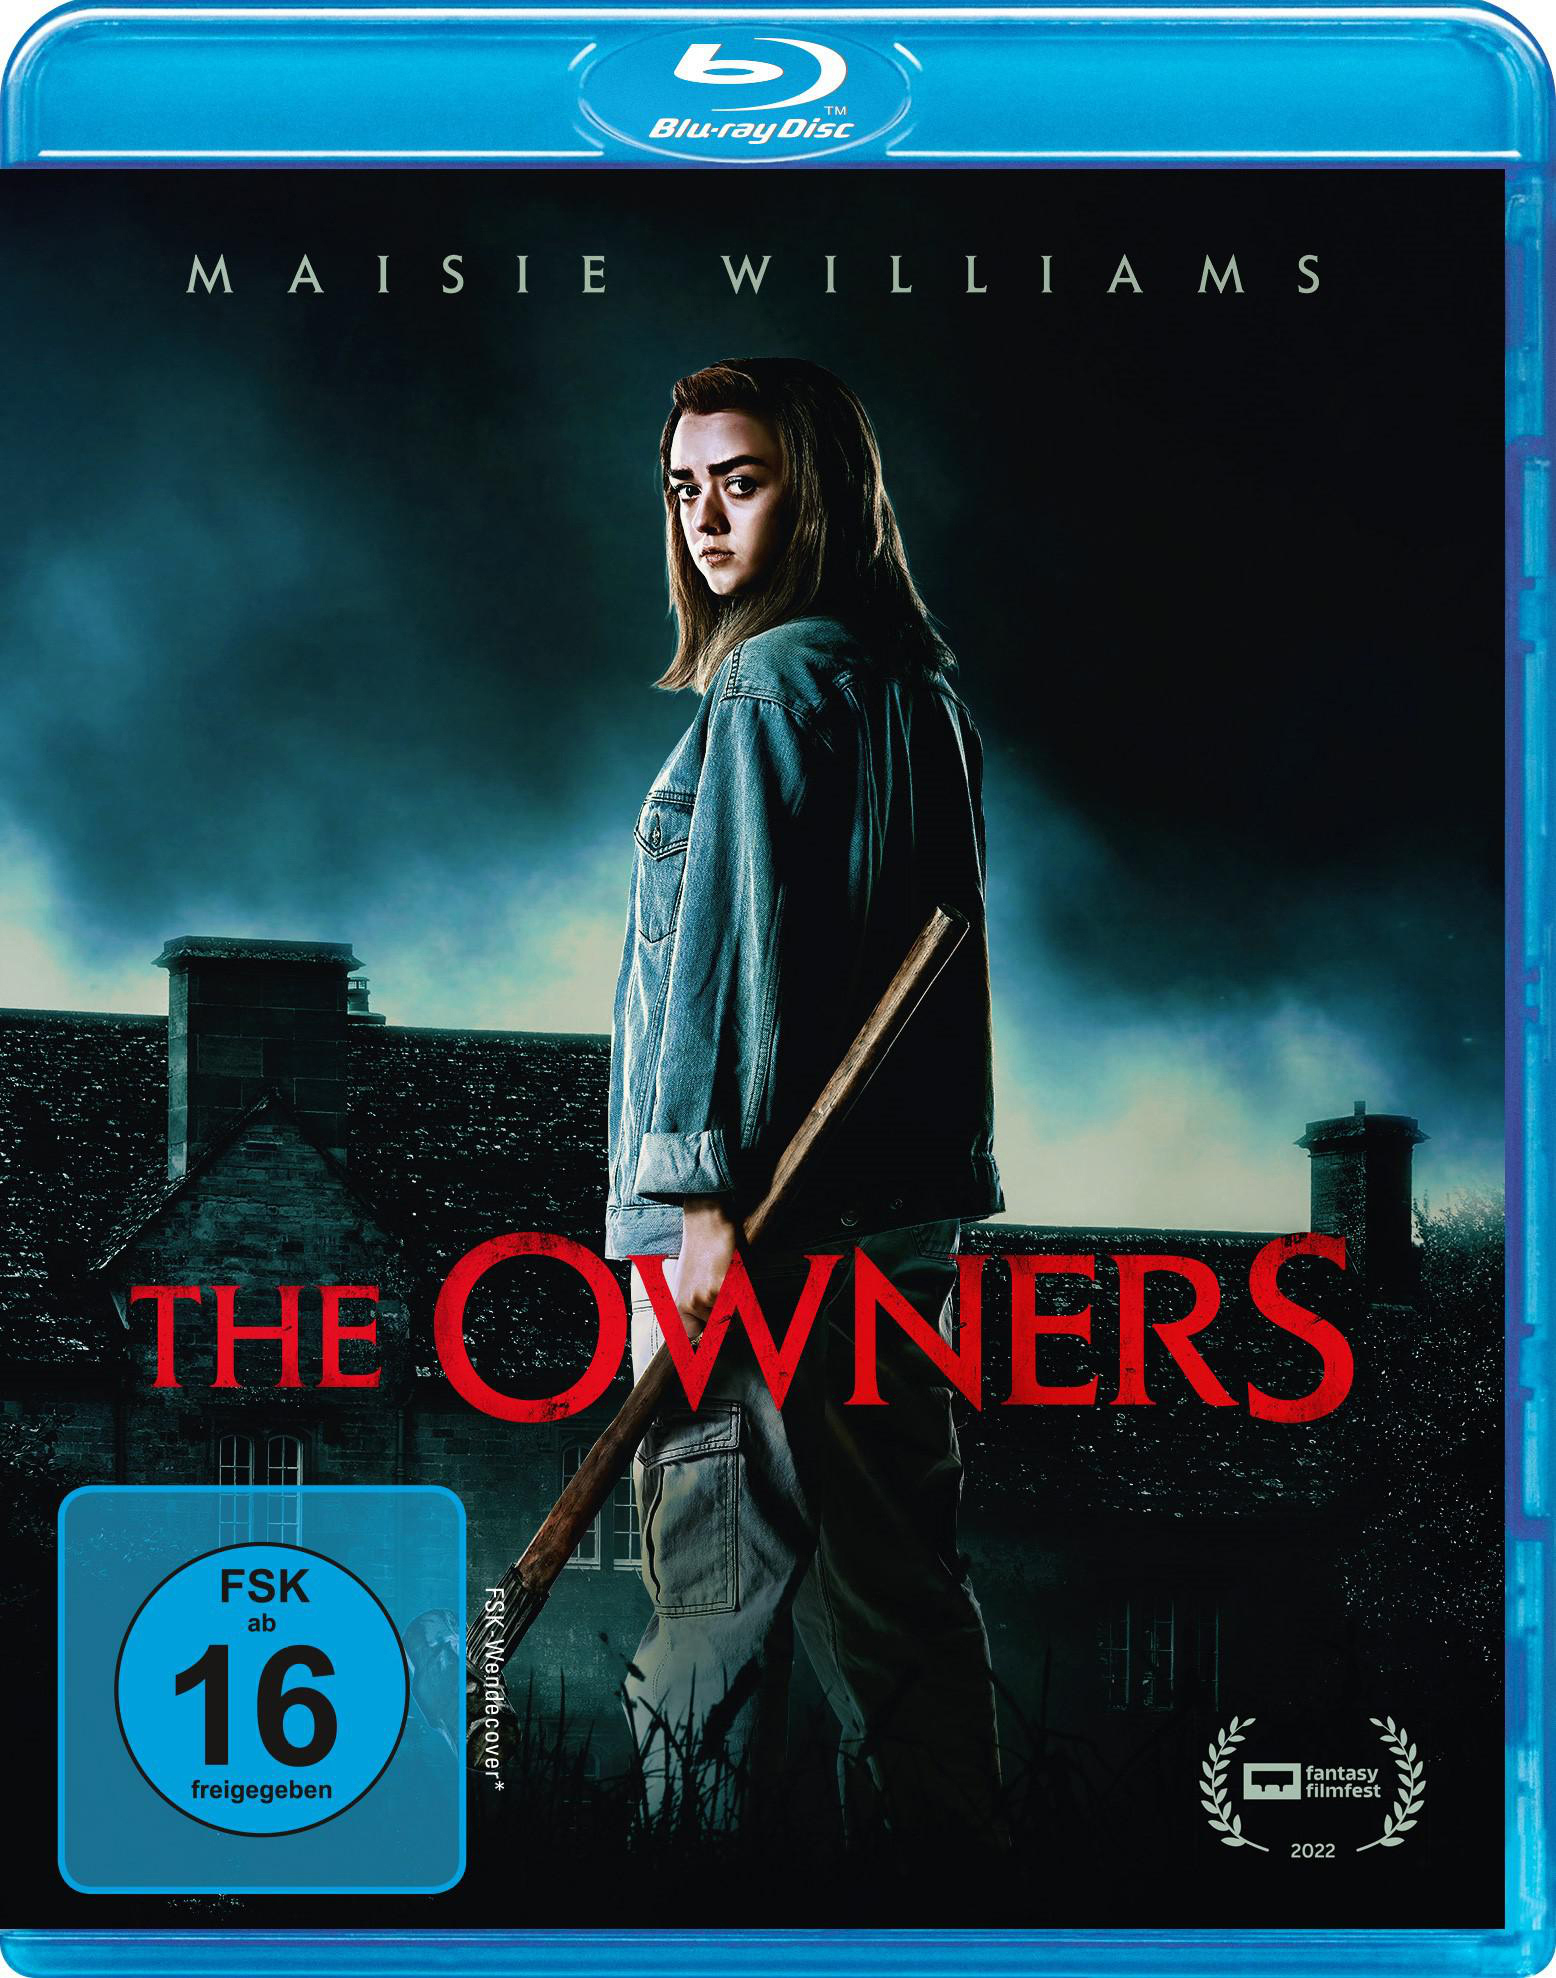 Owners Blu-ray The